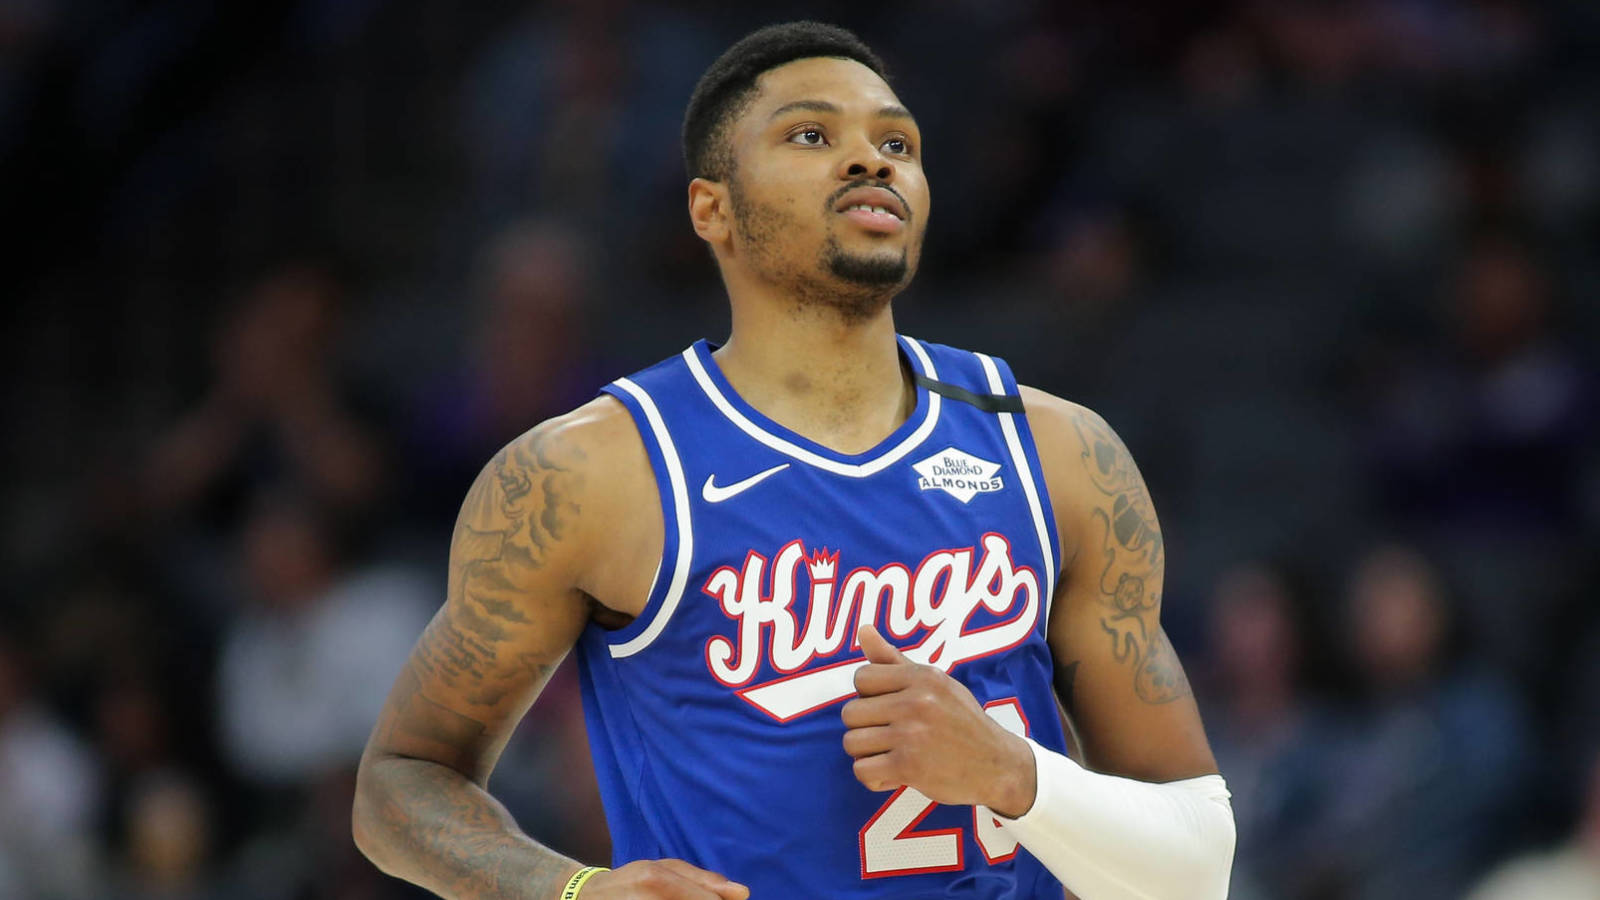 Kent Bazemore gave the Kings an unexpected boost | Yardbarker